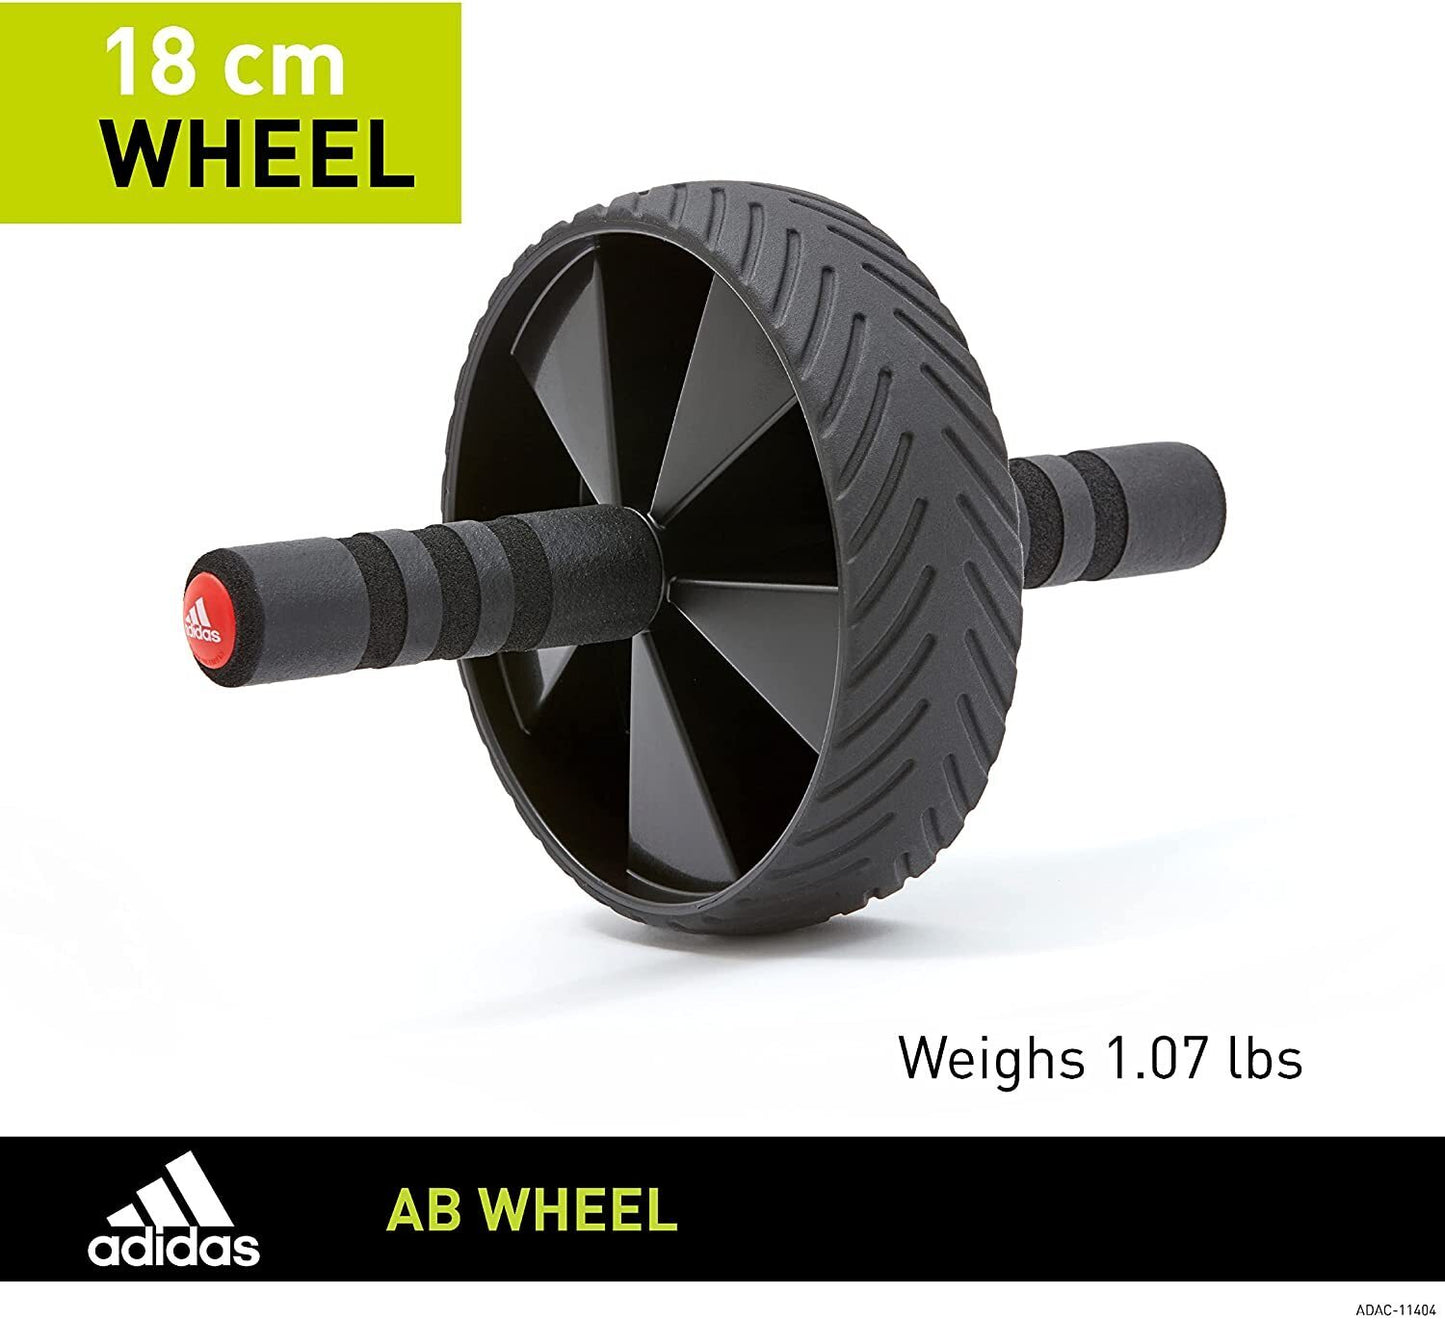 Adidas Ab Wheel Abdominal Core Strength Trainer Gym Fitness Exerciser Roller